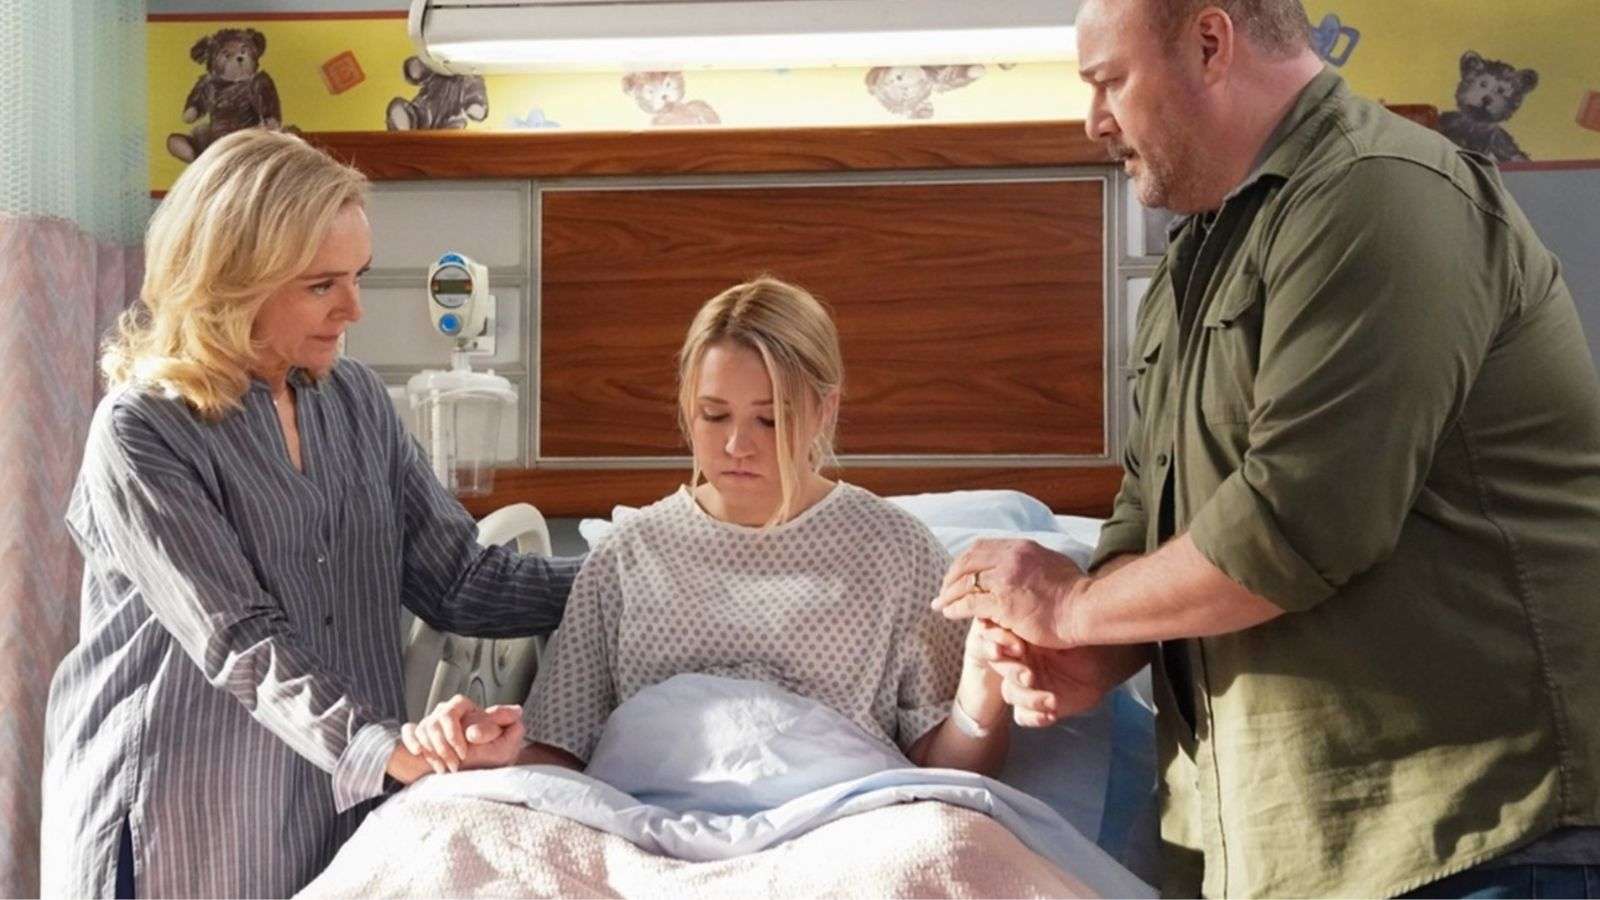 Mandy and her parents during CeeCee's birth in Young Sheldon.